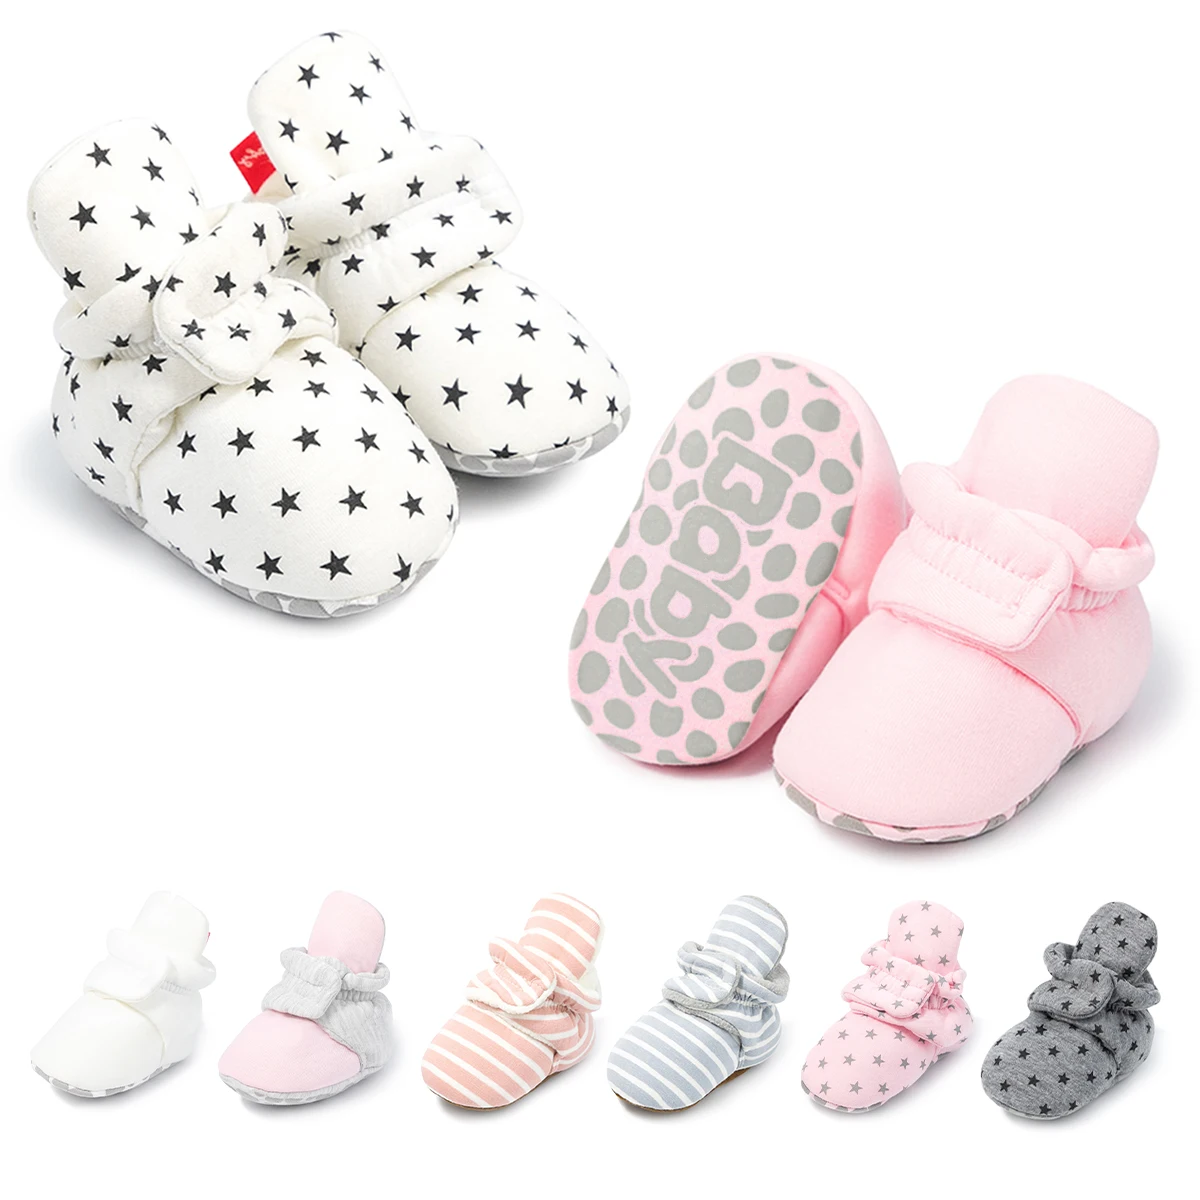 Warm Cotton Fabric Stars Print 0-18 Month Baby Girl Boots Shoes Baby Booties Baby Socks Shoes